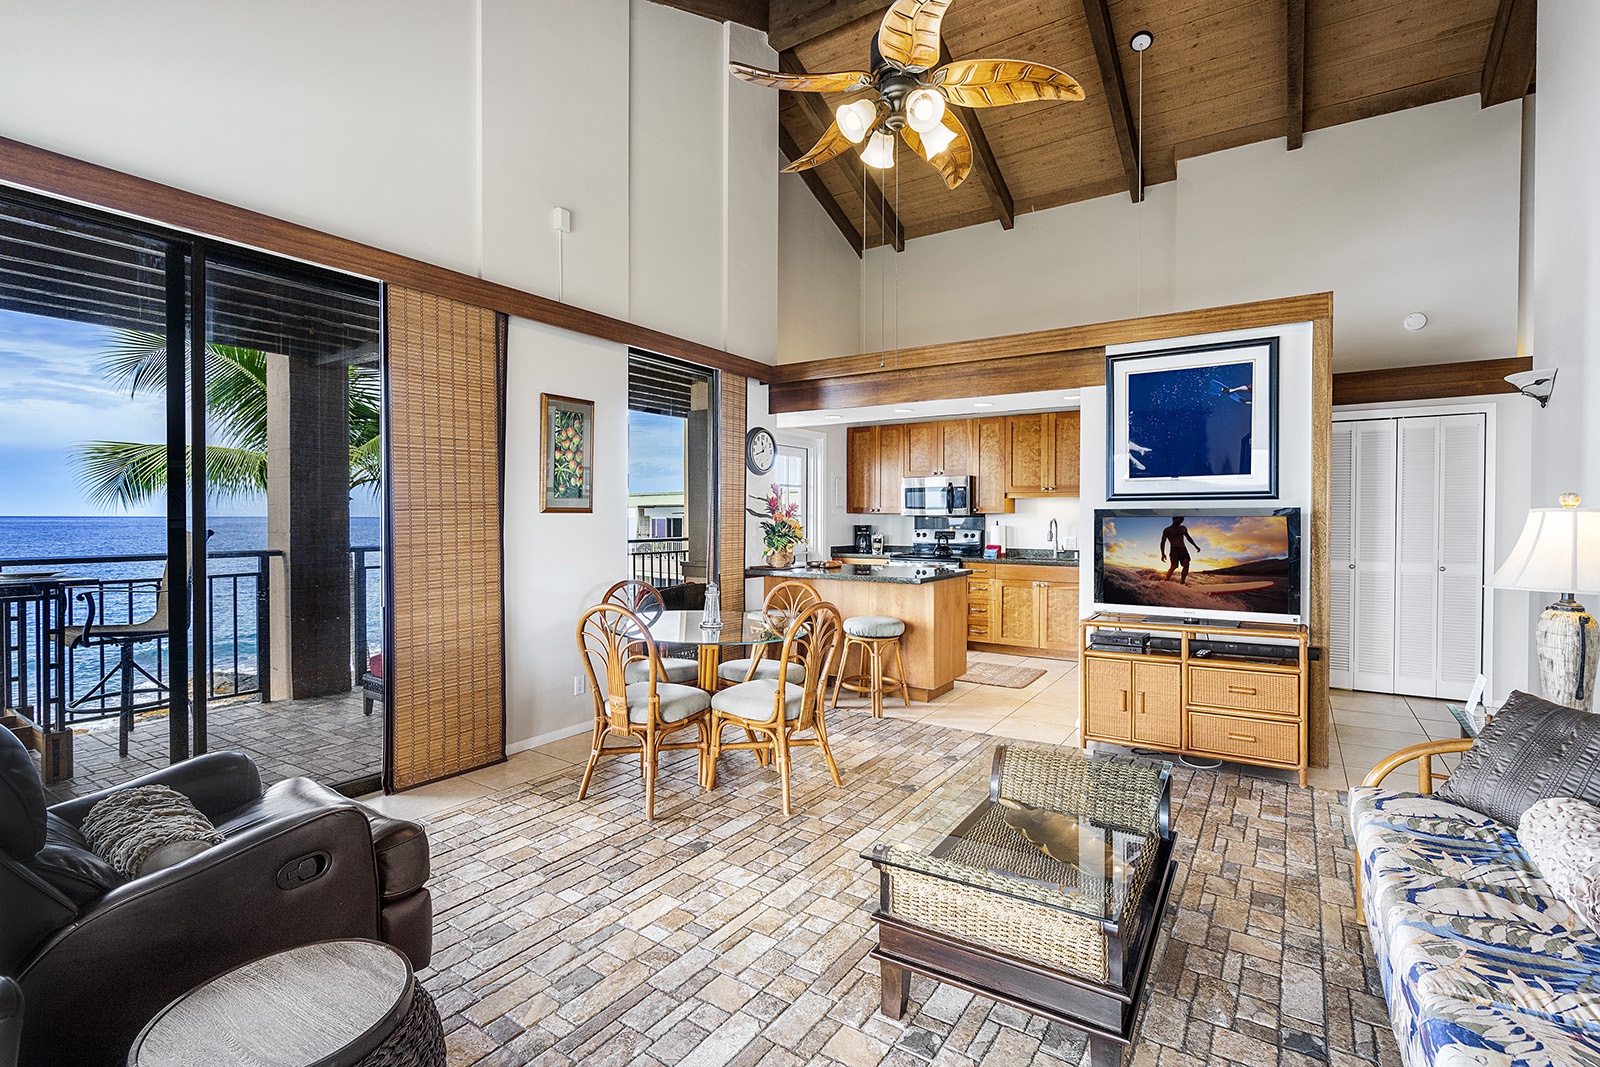 Kailua Kona Vacation Rentals, Kona Makai 6301 - Open floor plan with vaulted ceiling allows the Ocean breeze to move freely